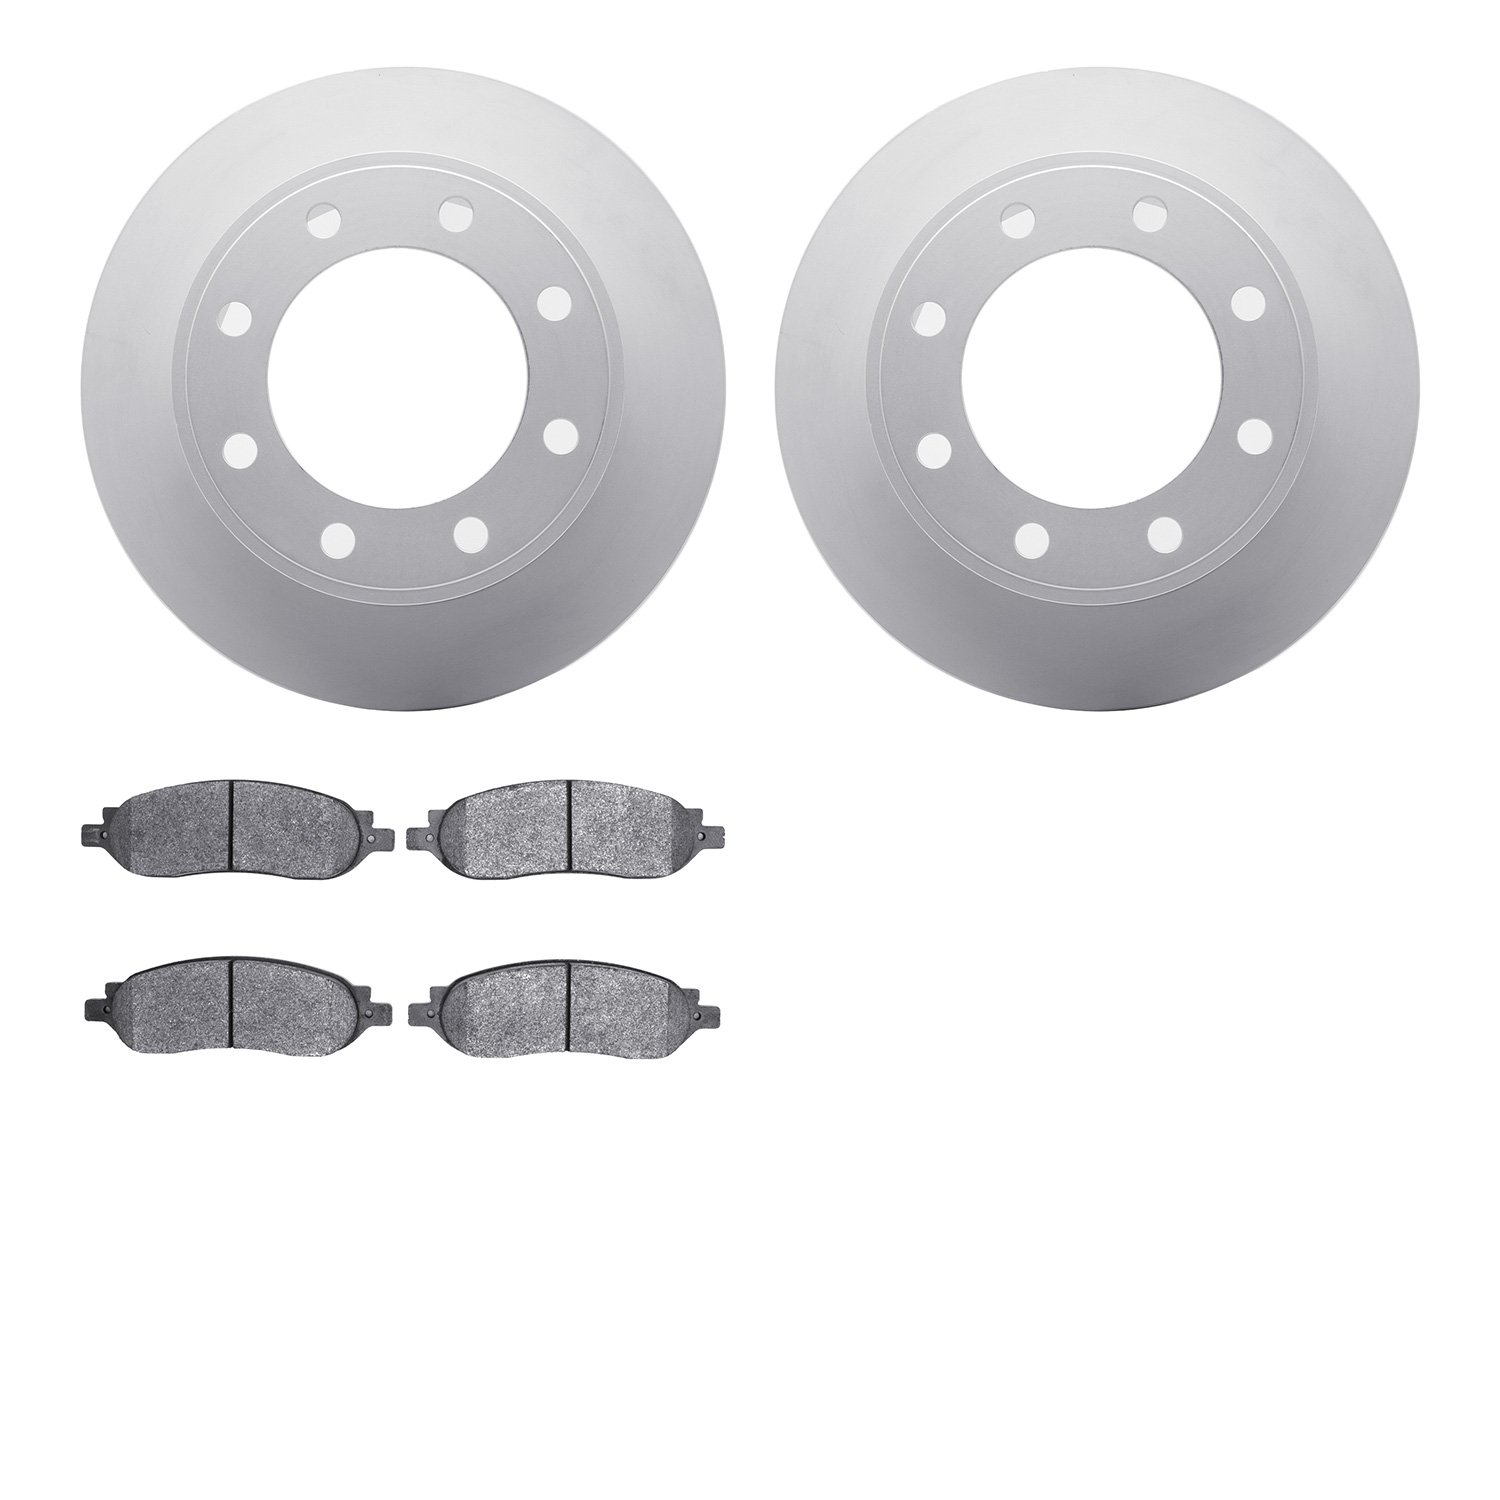 4402-54056 Geospec Brake Rotors with Ultimate-Duty Brake Pads Kit, 2005-2007 Ford/Lincoln/Mercury/Mazda, Position: Rear